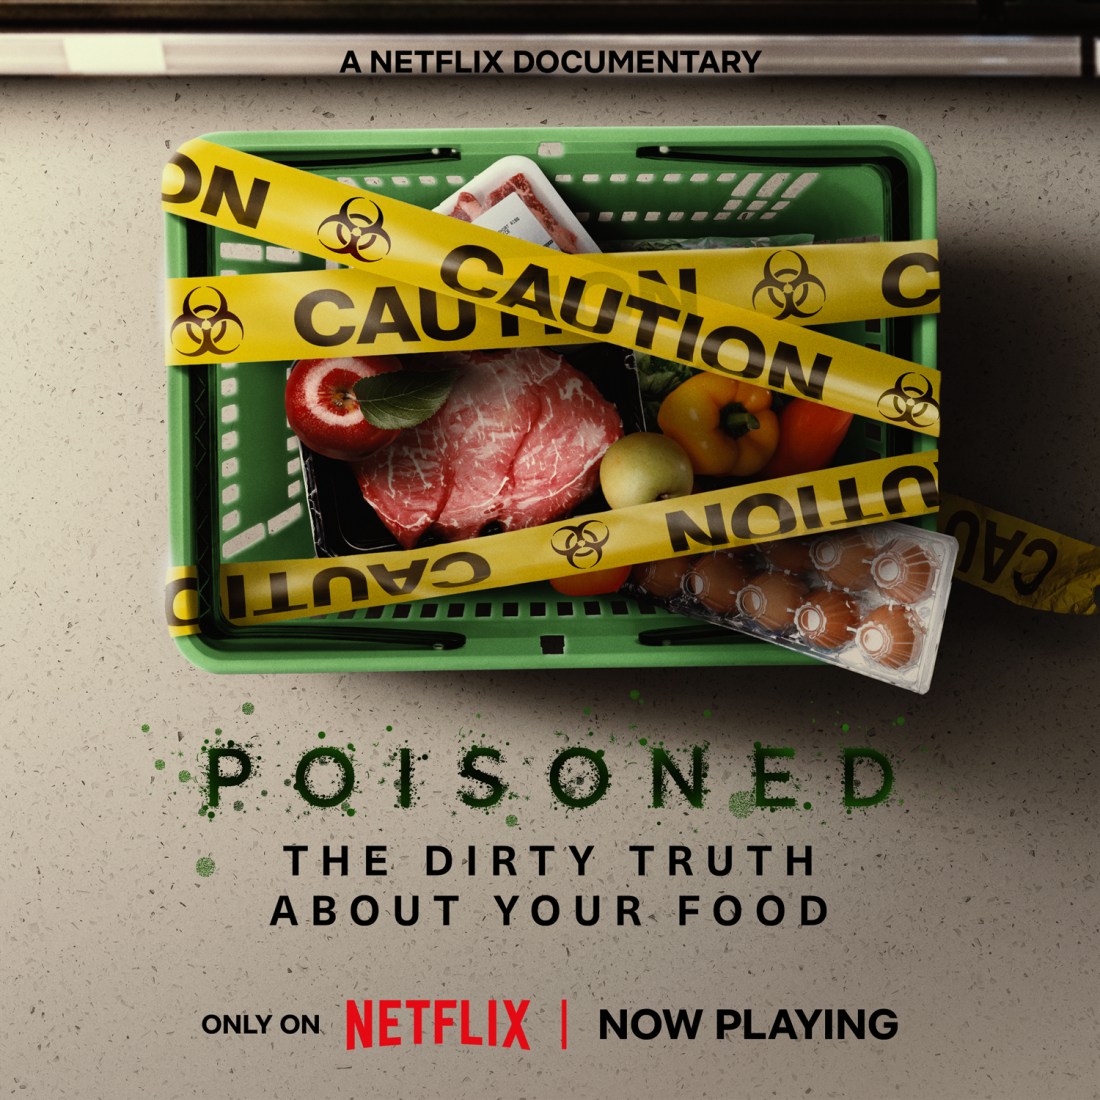 An image of the Poisoned documentary poster, which includes a basket of eggs, meat, apples, and peppers with yellow "caution tape" over it. The text on the poster reads, "Poisoned. The dirty truth about your food. Only on Netflix. Now playing."